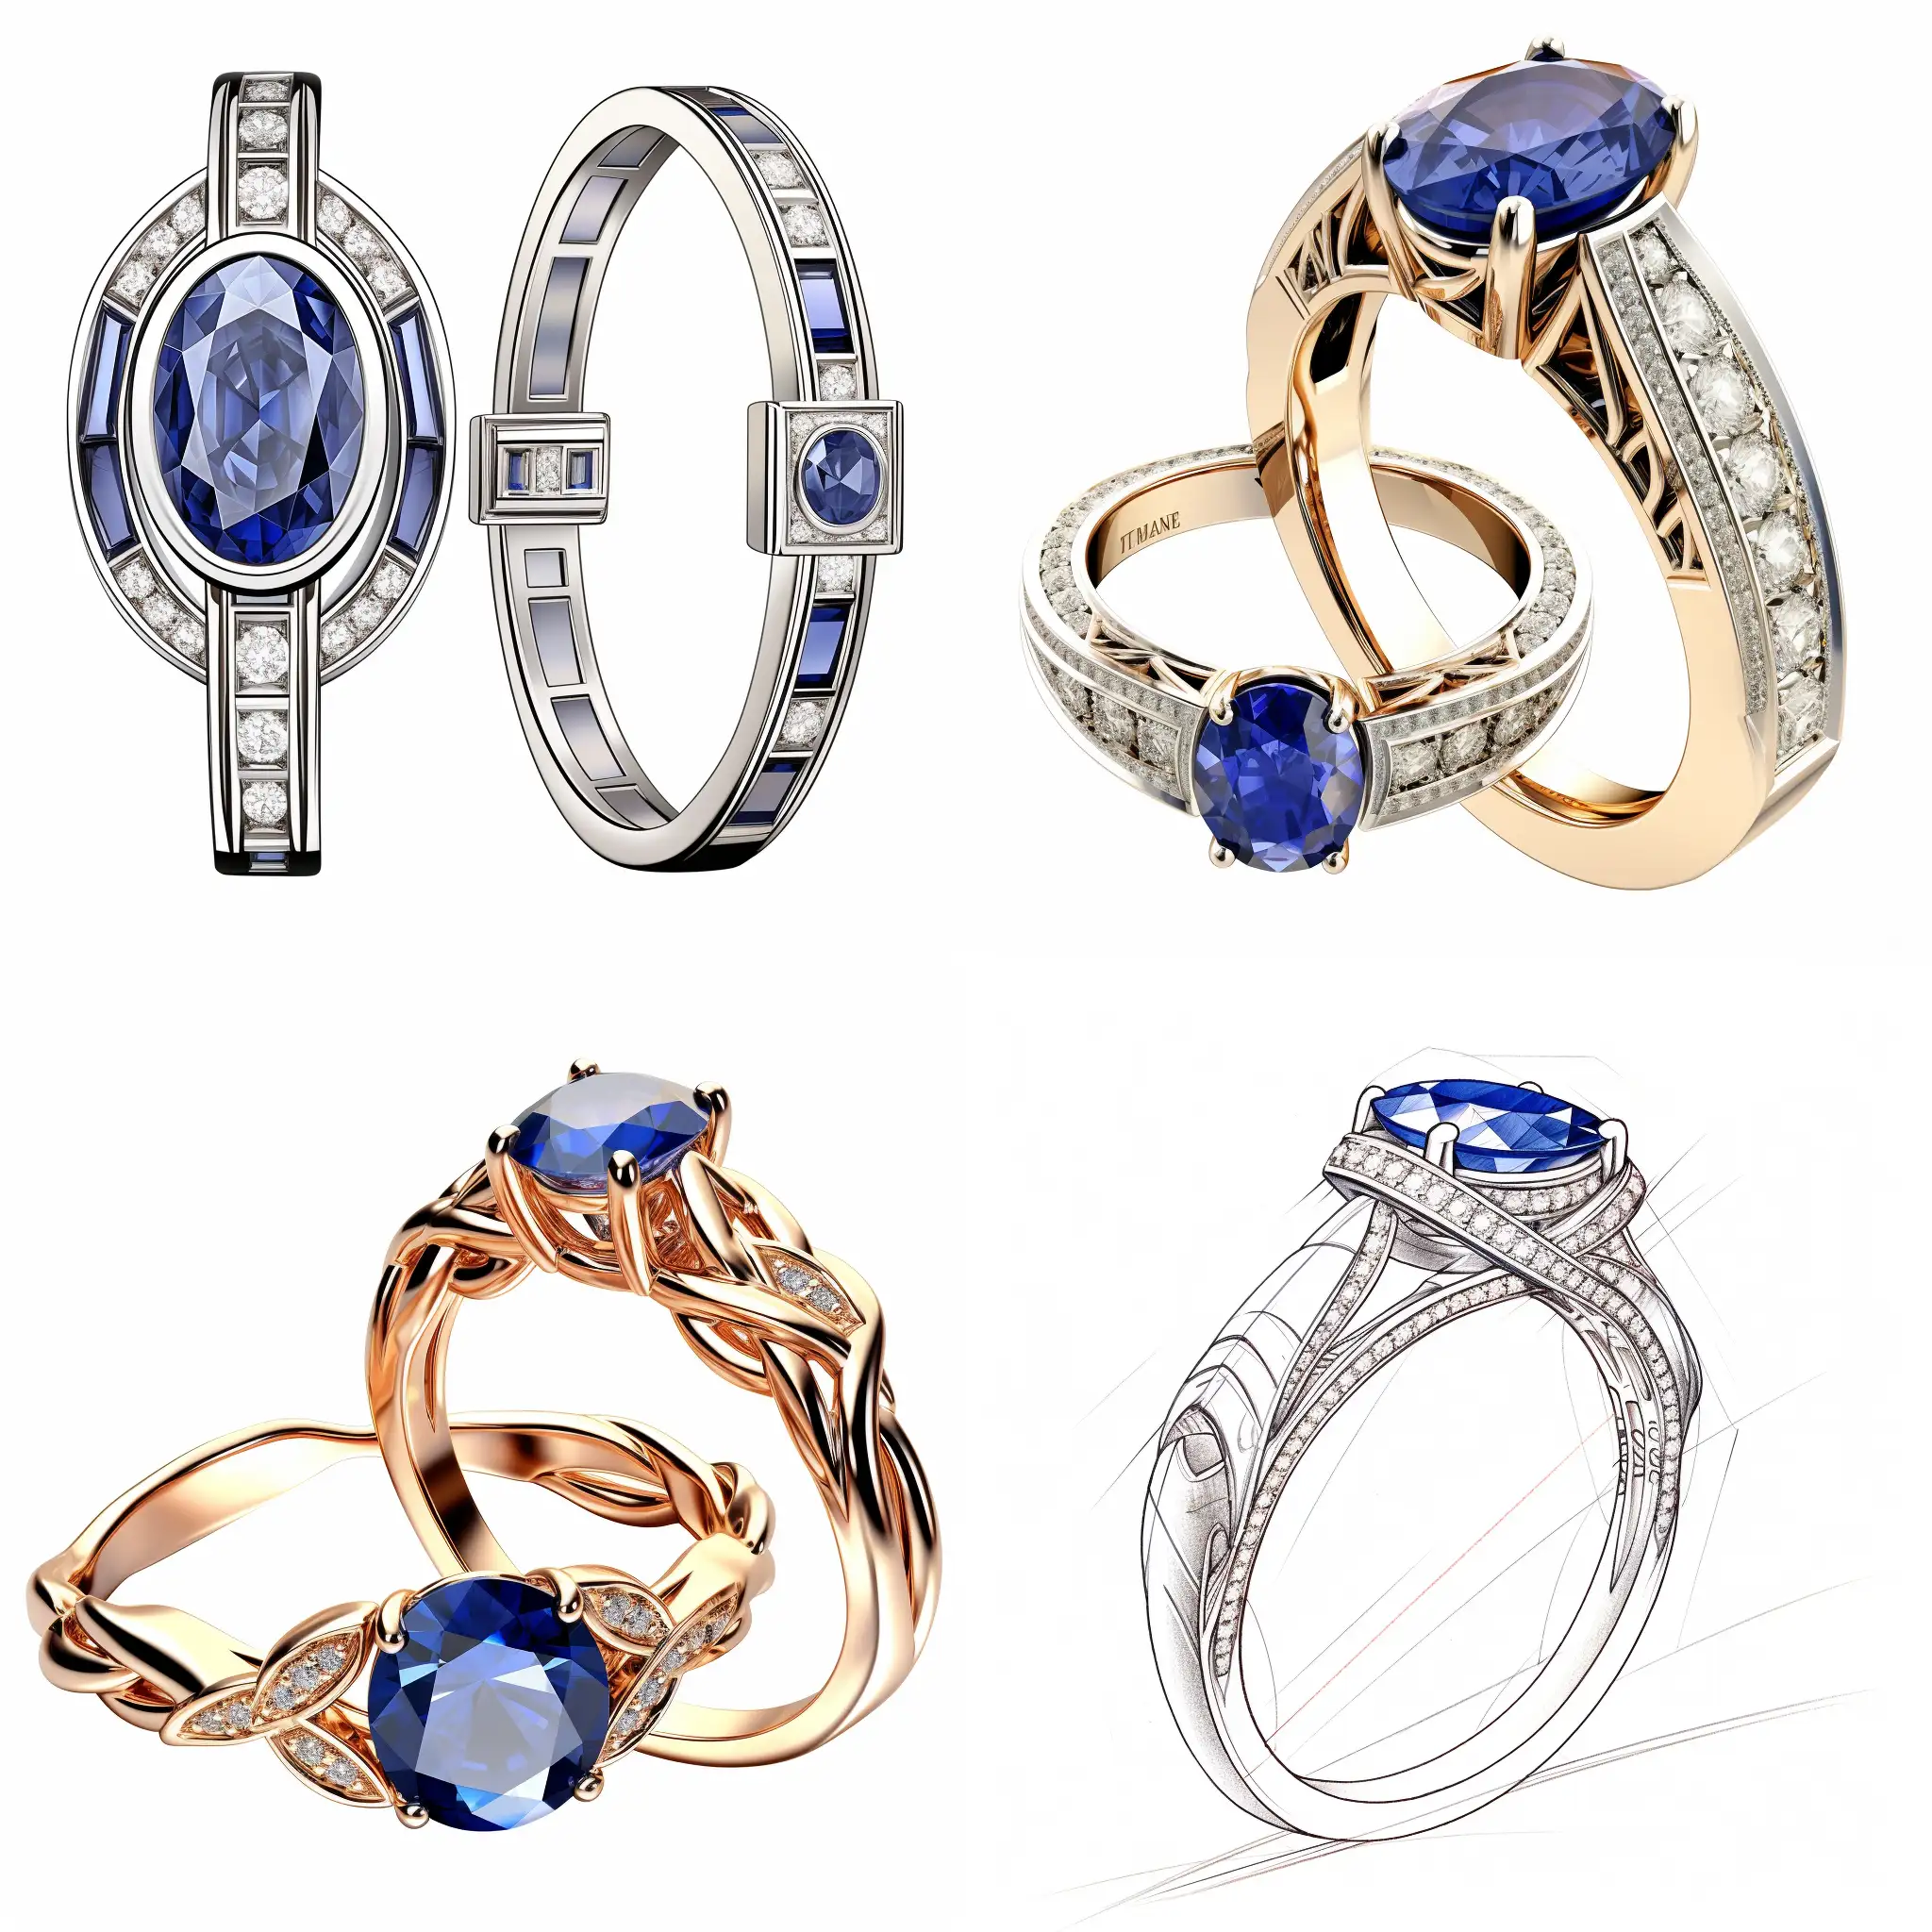 Design an oval one carat royal sapphire ring with a diamond letter H on the left and right arms